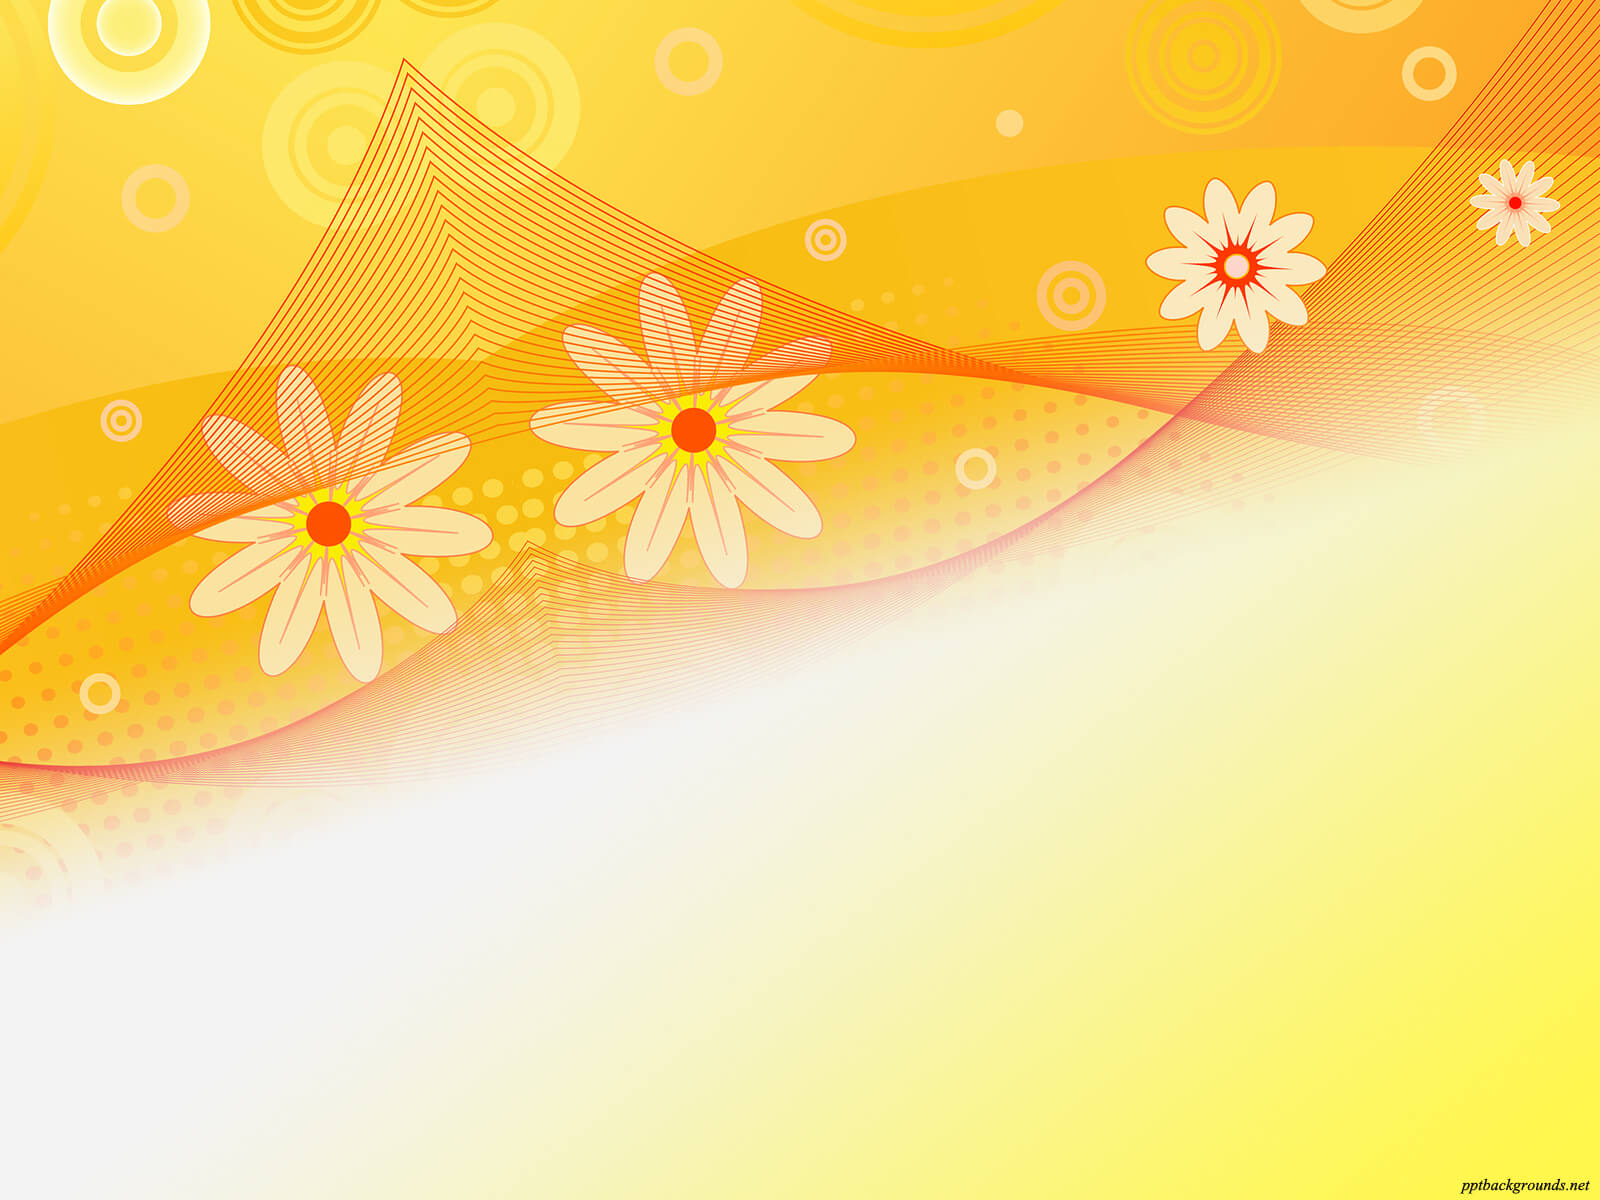 Sunflower Abstract Beauty Backgrounds For Powerpoint In Pretty Powerpoint Templates